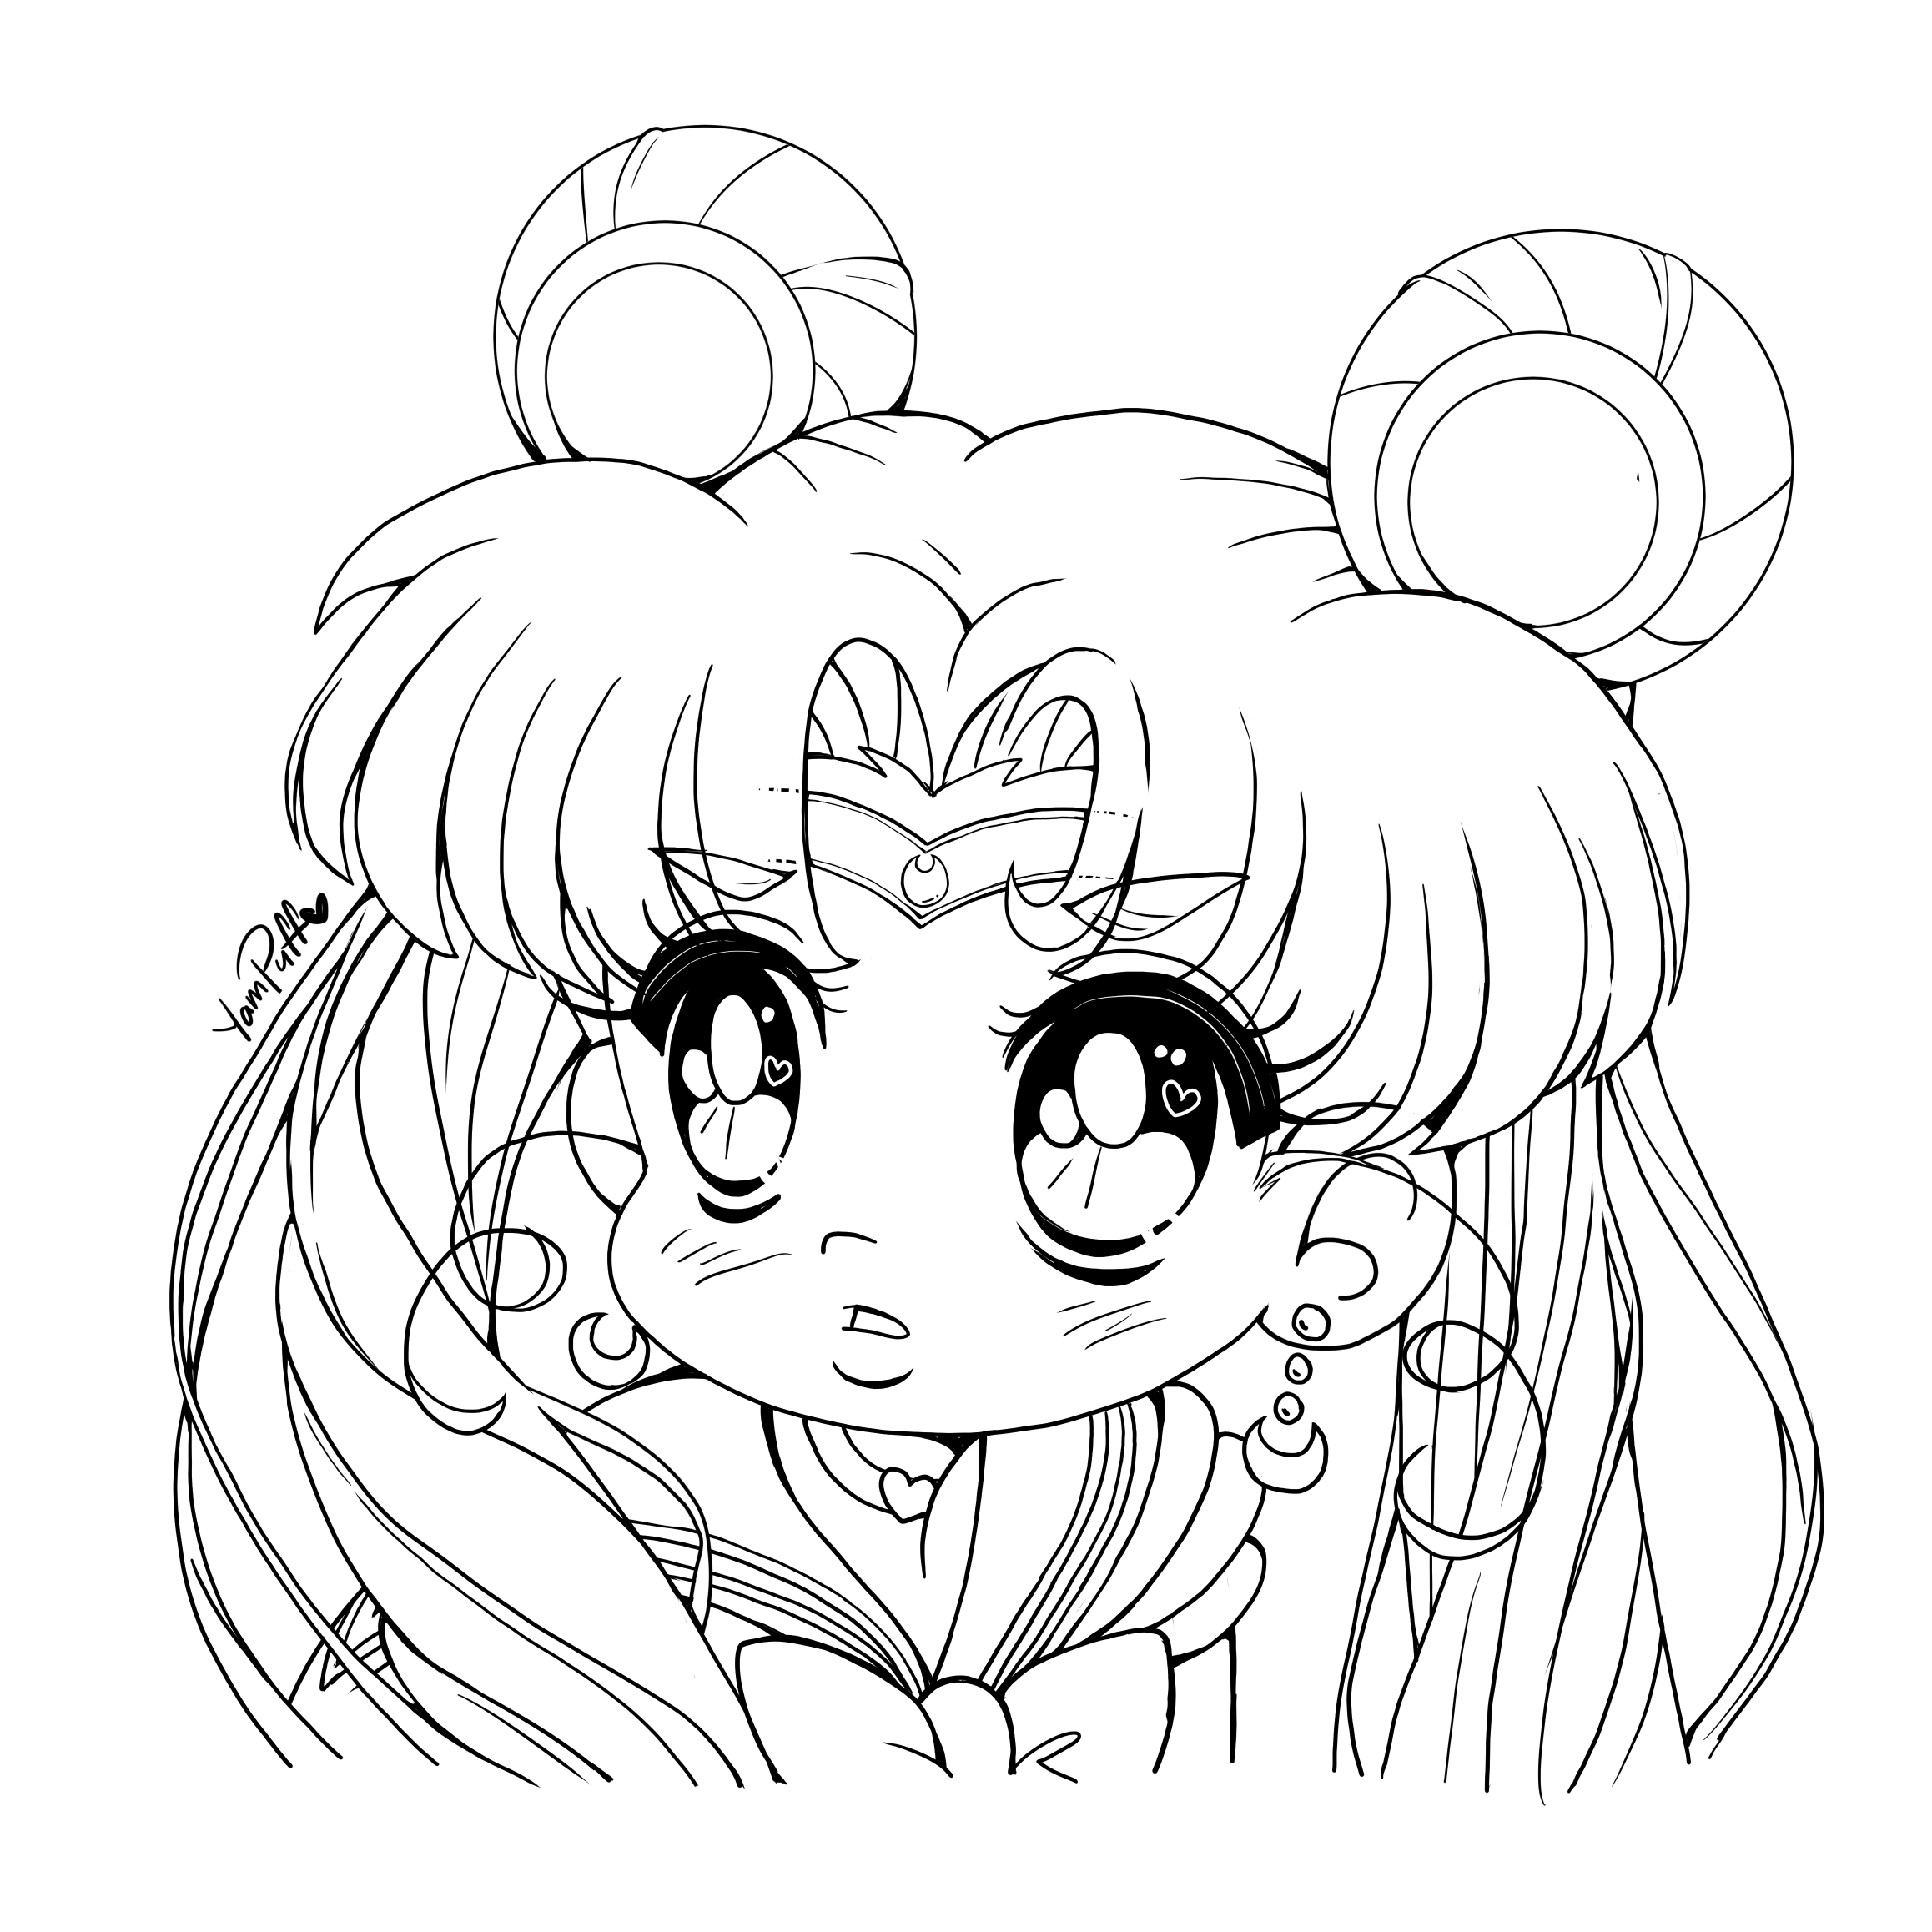 Sailor Moon Redraw Challenge Coloring Page by YamPuff • YamPuff's ...